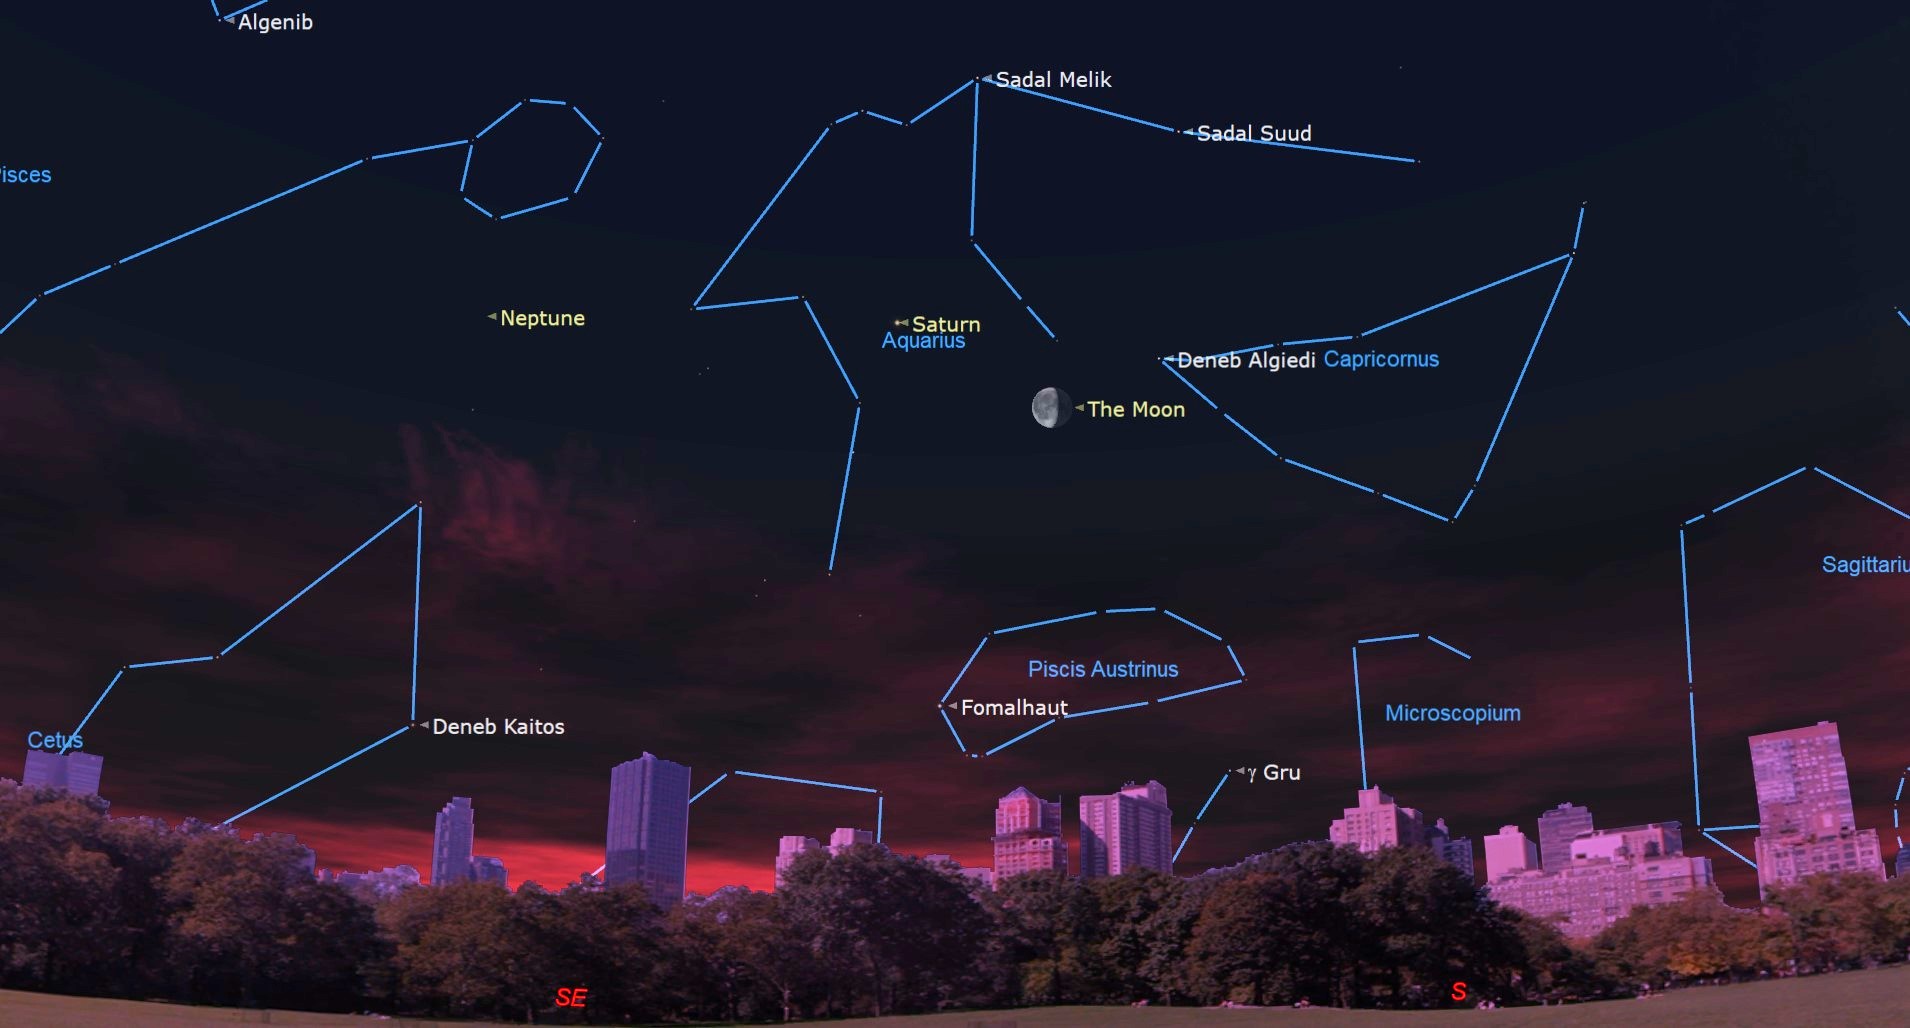 Watch the moon snuggle up to Saturn in the night sky late tonight